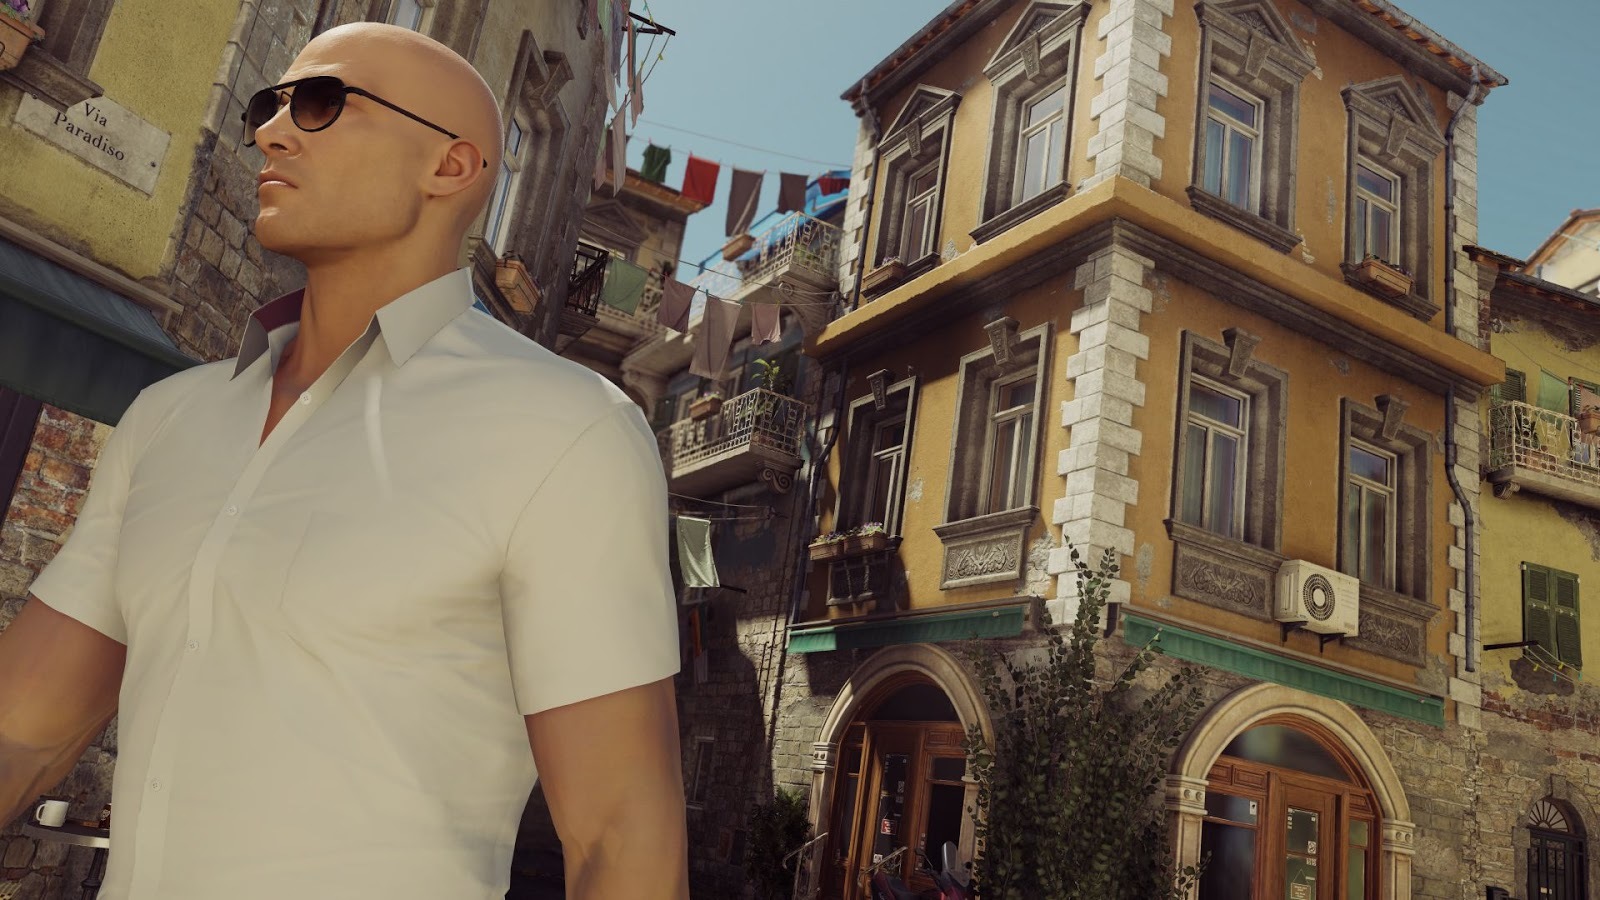 The Hitman Series Has A Long History Of Excellence